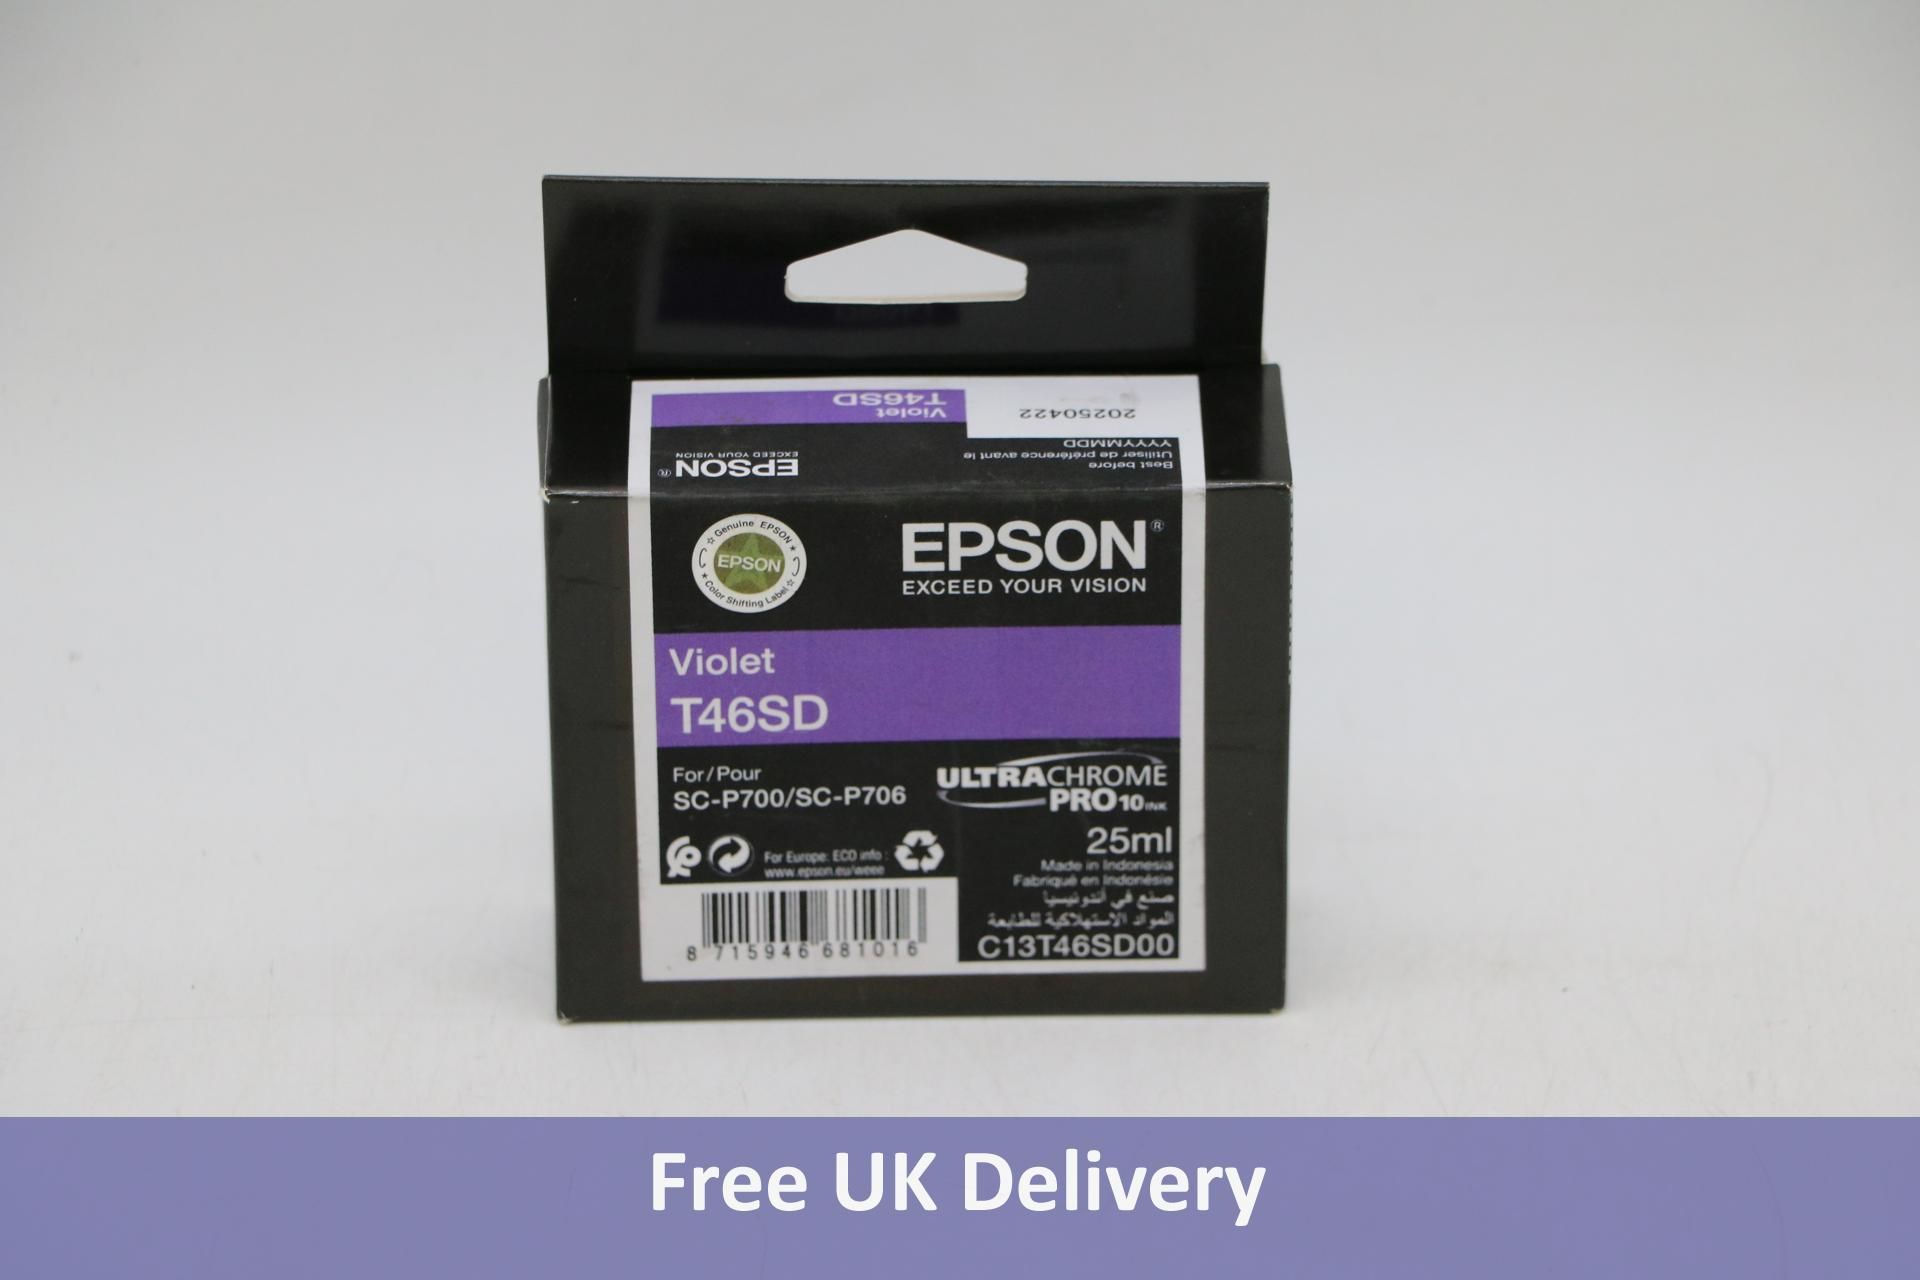 Two Epson UltraChrome Pro 10 Ink, 1x Matte Black T46S8 and 1x Violet T46SD, Both 25ml